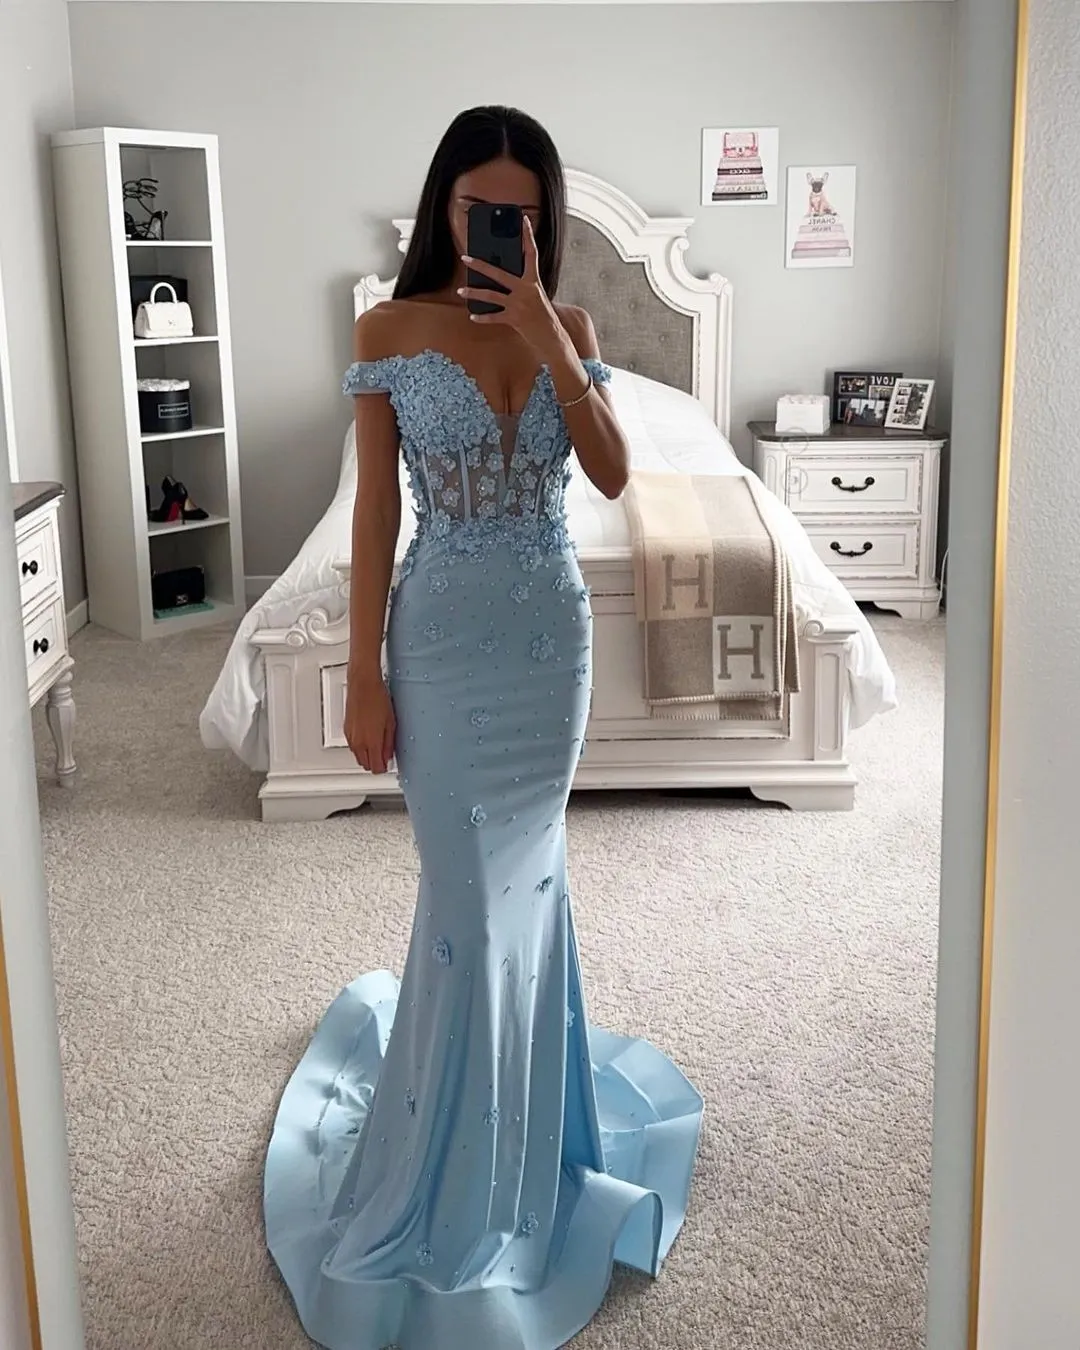 Romantic Mermaid Evening Dresses for Women Off Shoulder Handmade Flowers See Through Formal Occasions Wear Party Second Reception Birthday Pageant Prom Gowns